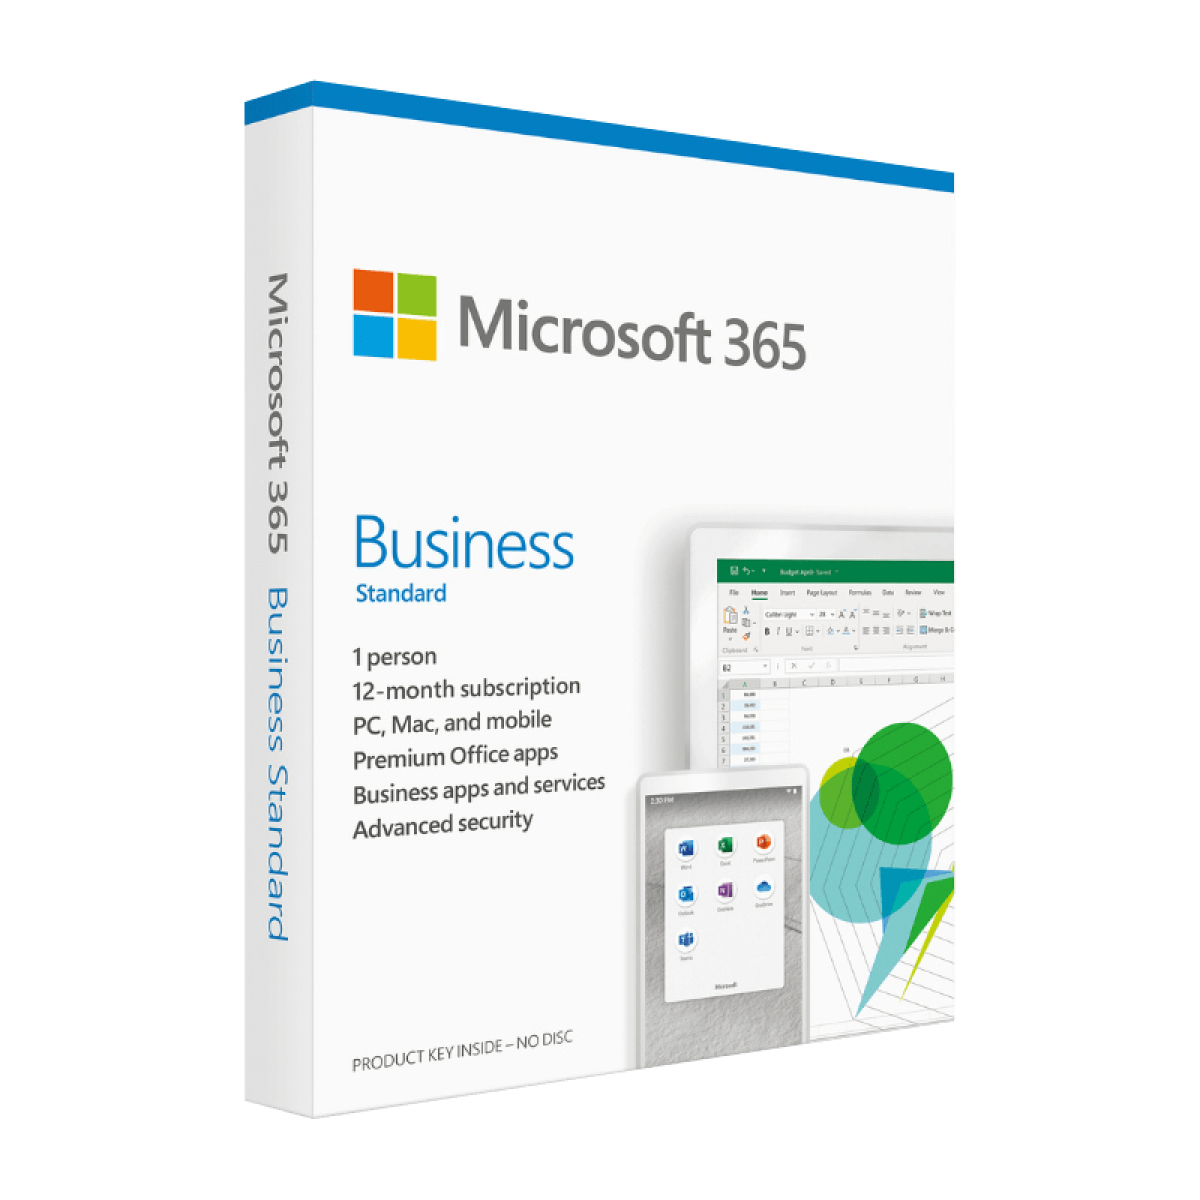 Microsoft 365 Business Standard 5 Pcmac 5 Tablets 5 Mobile